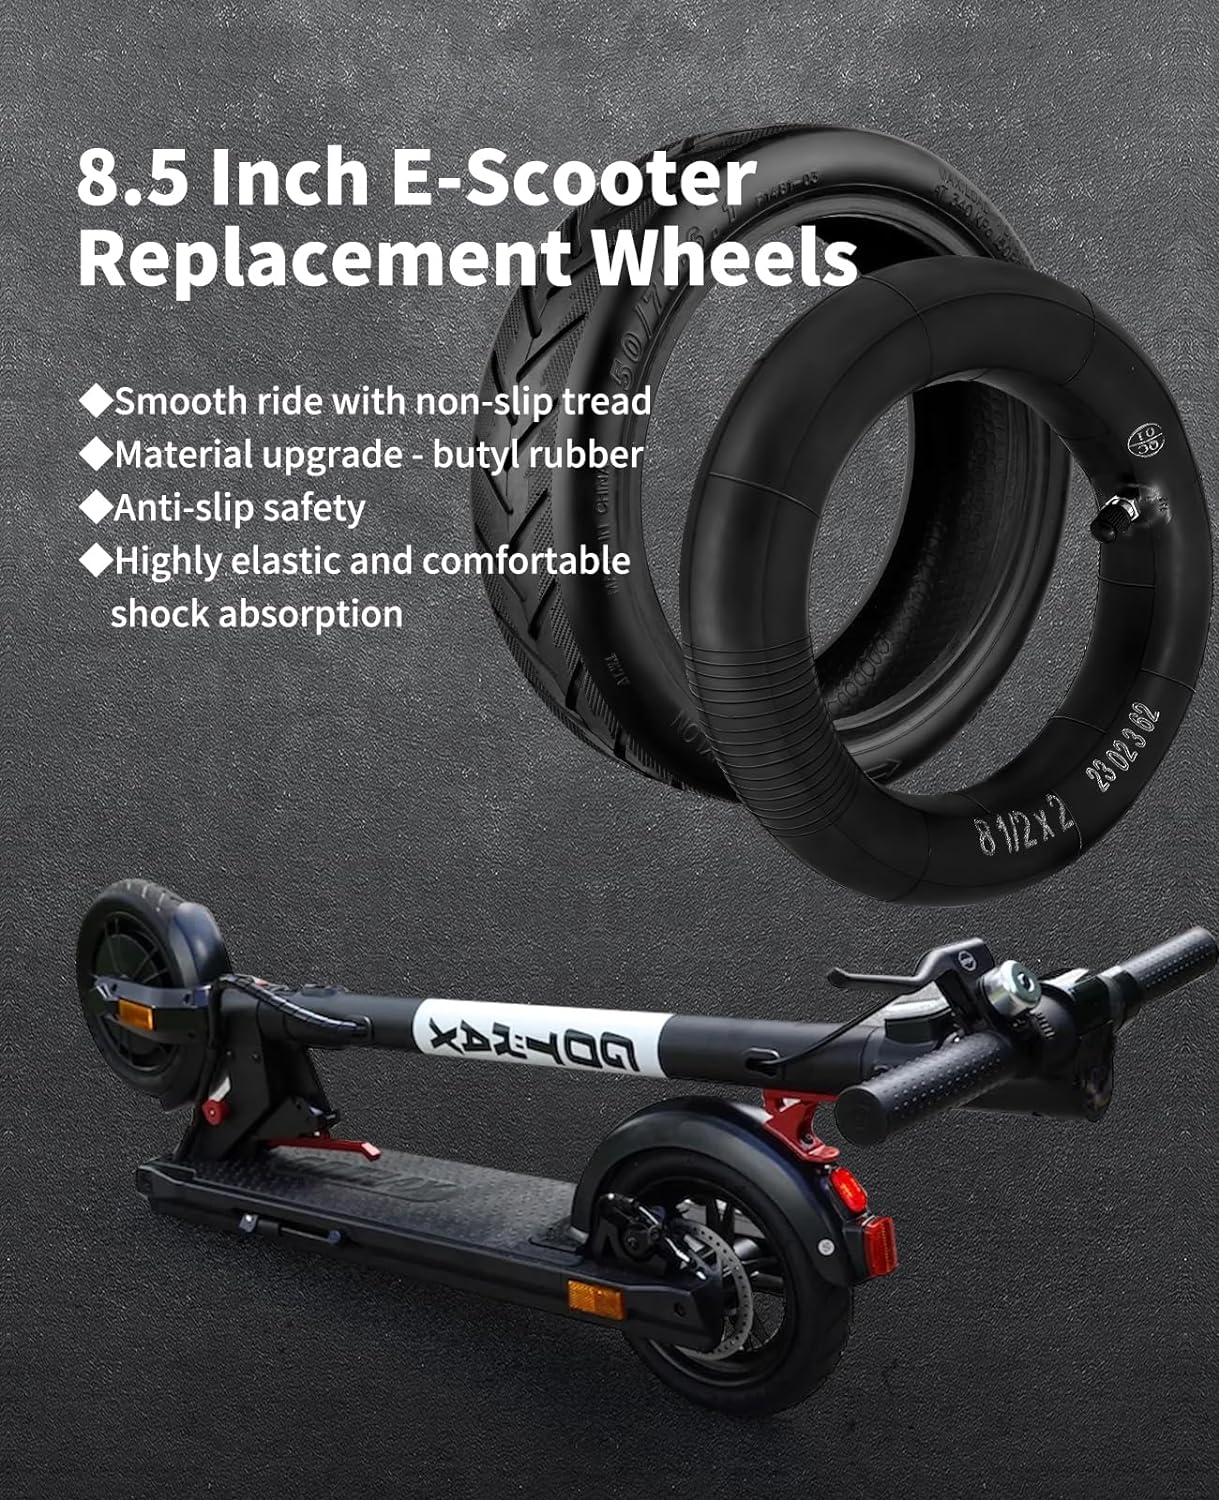 aibiku 50/75-6.1 Off-road Tires with Thickened 8 1/2 x 2 Inner Tube for  Xiaomi M365, Pro, Gotrax, 8.5 Inch Scooter Tires, Scooter Accessories (2  Sets)